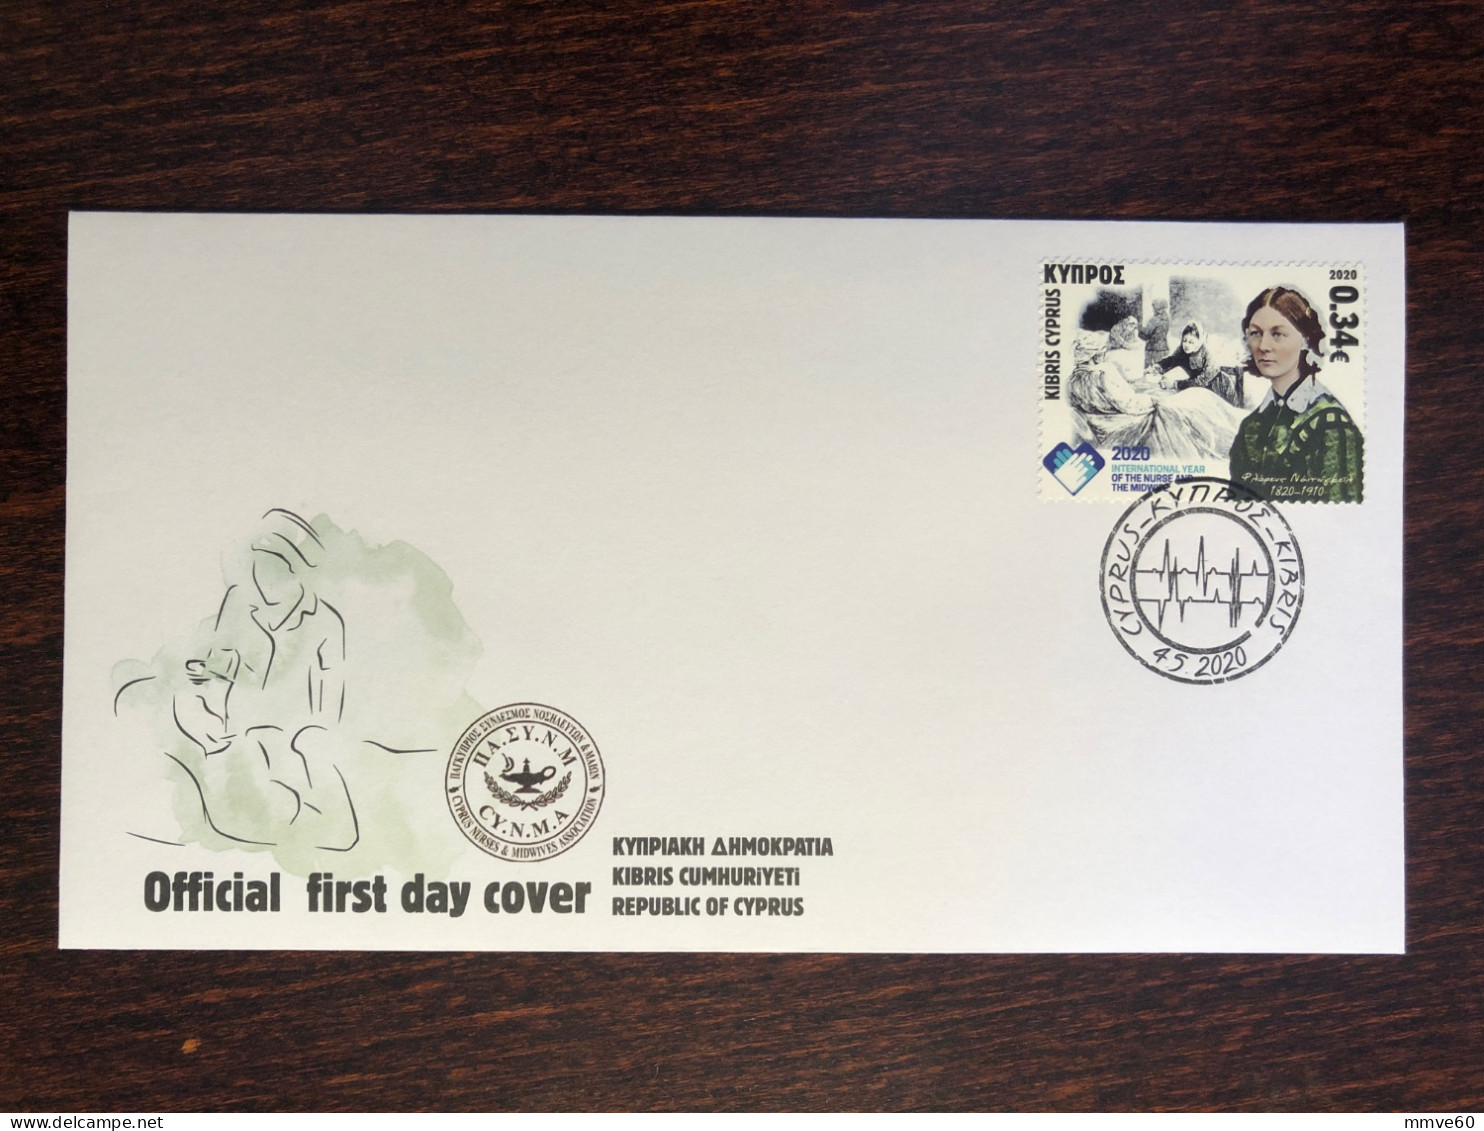 CYPRUS FDC COVER 2020 YEAR NIGHTINGALE NURSES HEALTH MEDICINE STAMPS - Covers & Documents